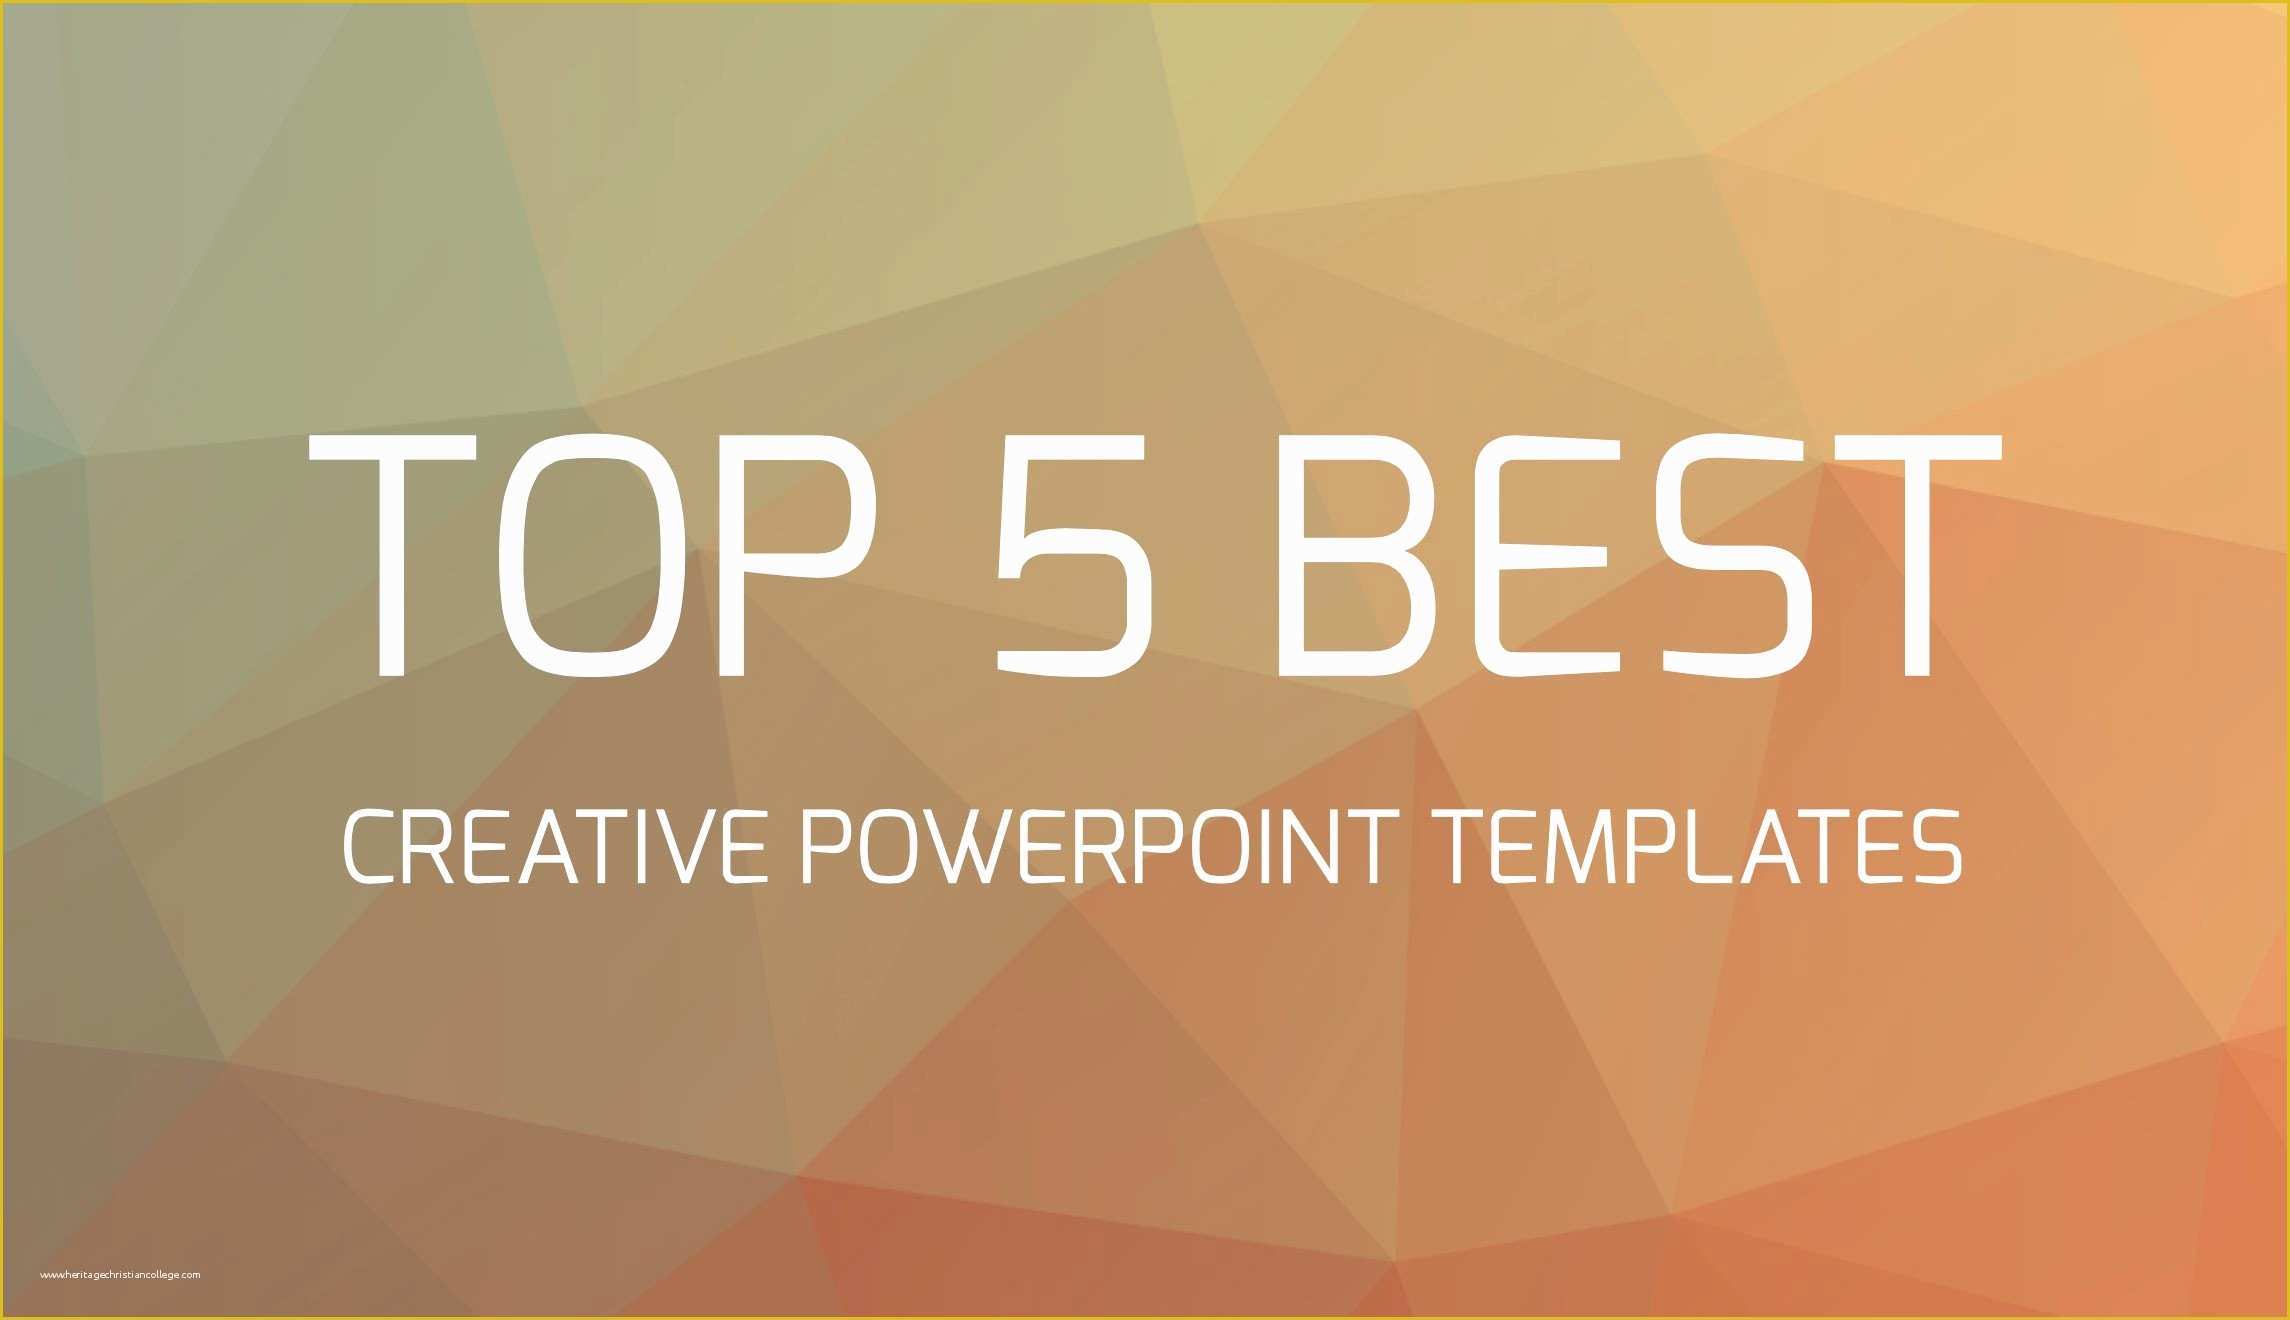 Best Powerpoint Templates Free Of 42 Cool Powerpoint Backgrounds ·① Download Free Awesome